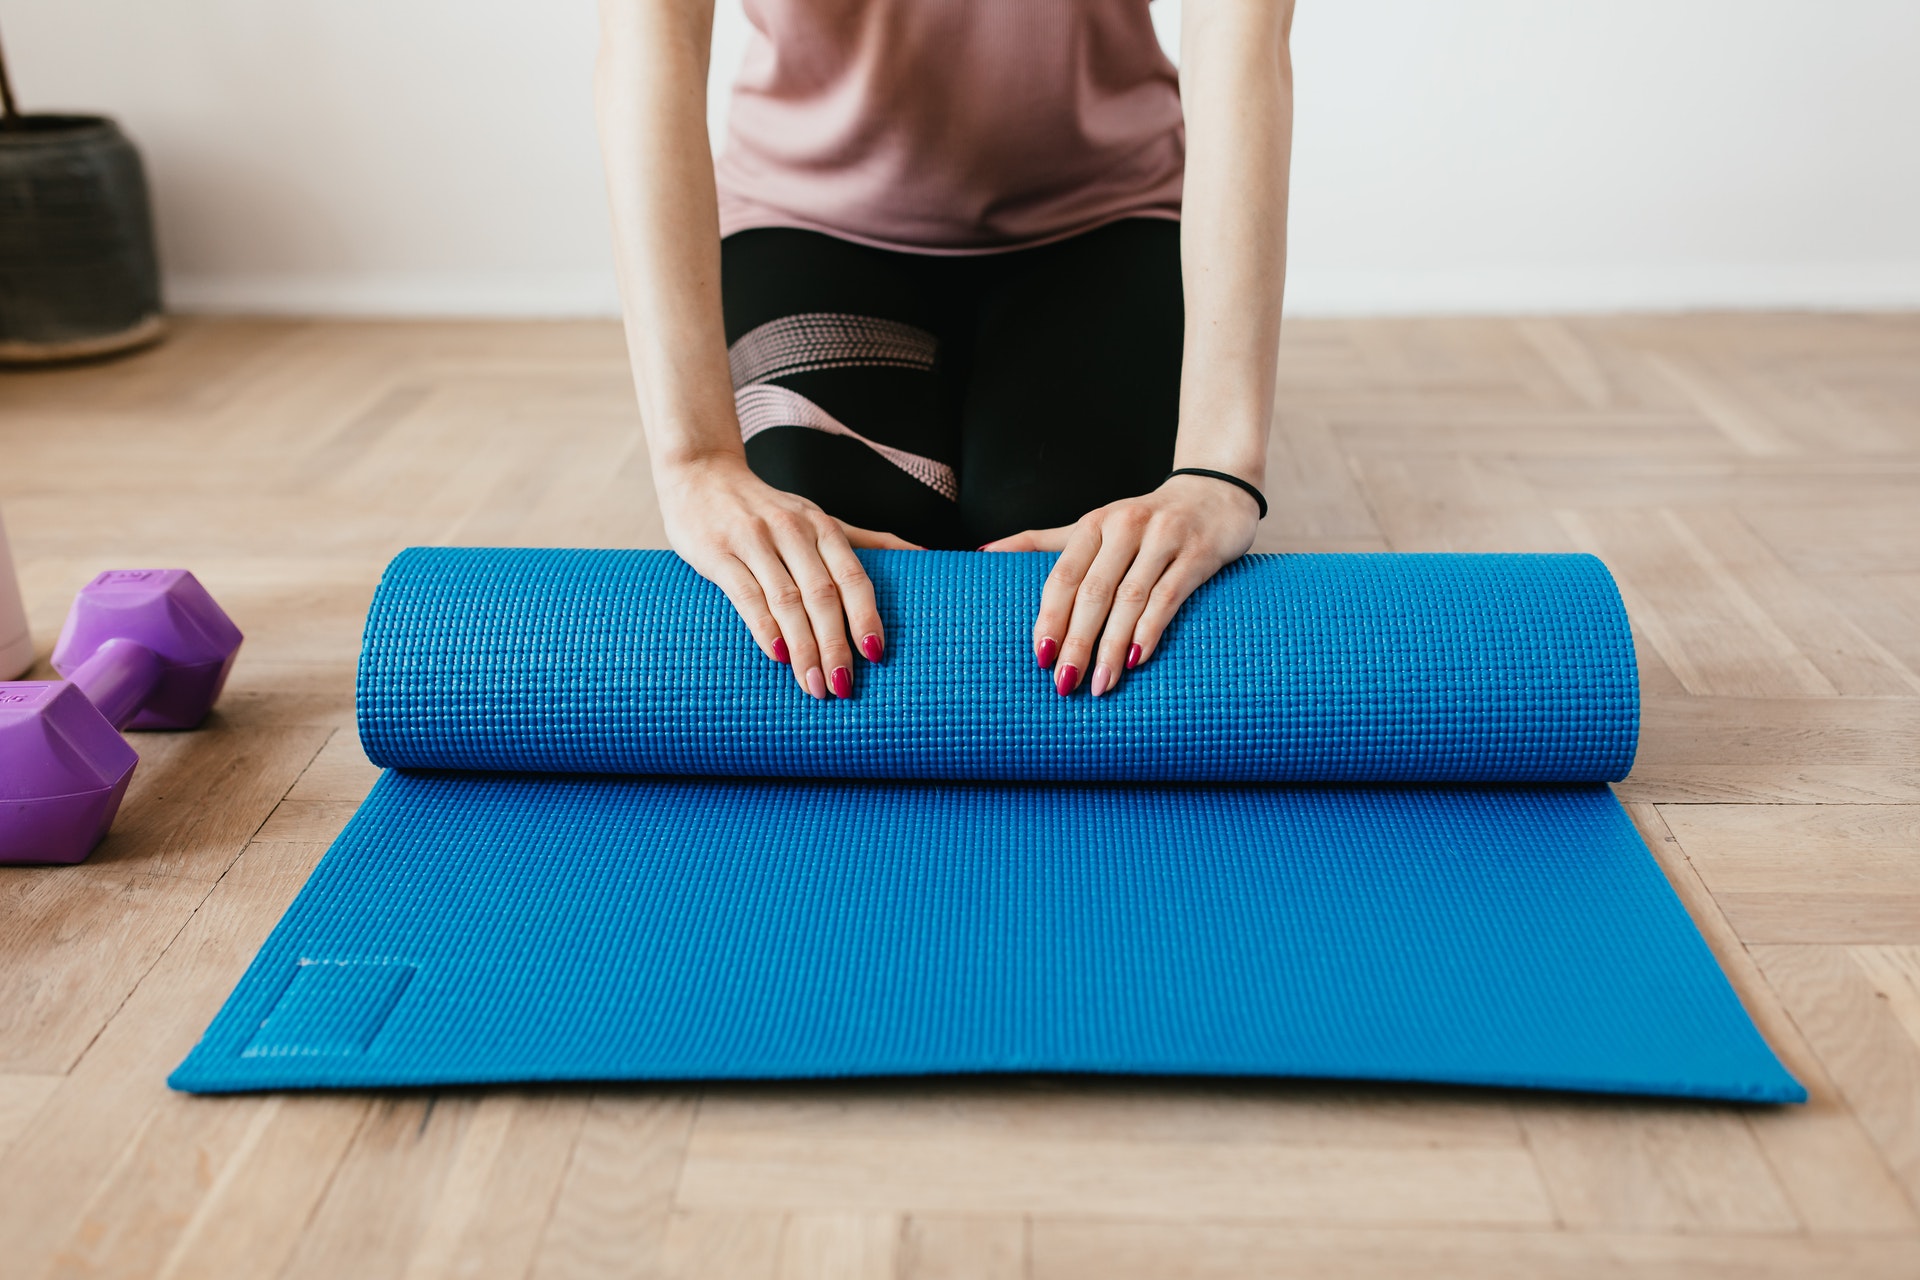 A woman rolls up a yoga mat on the floor